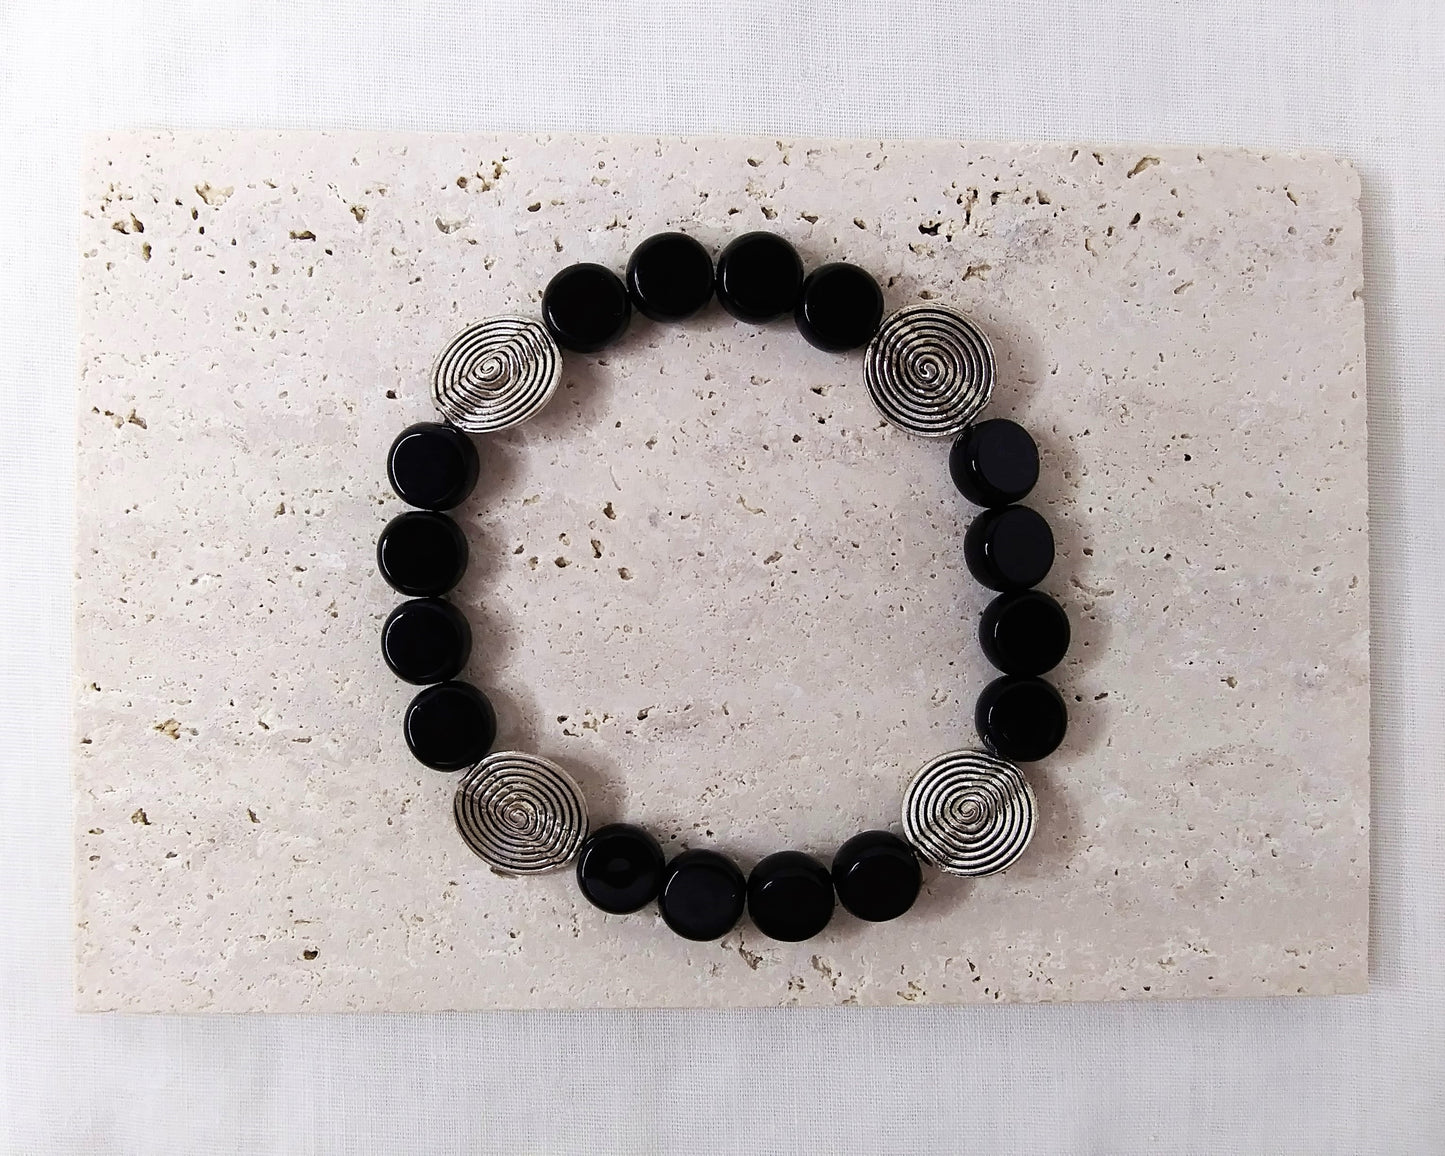 Stretch Stackable Black and Silver Bracelet with Spiral Design